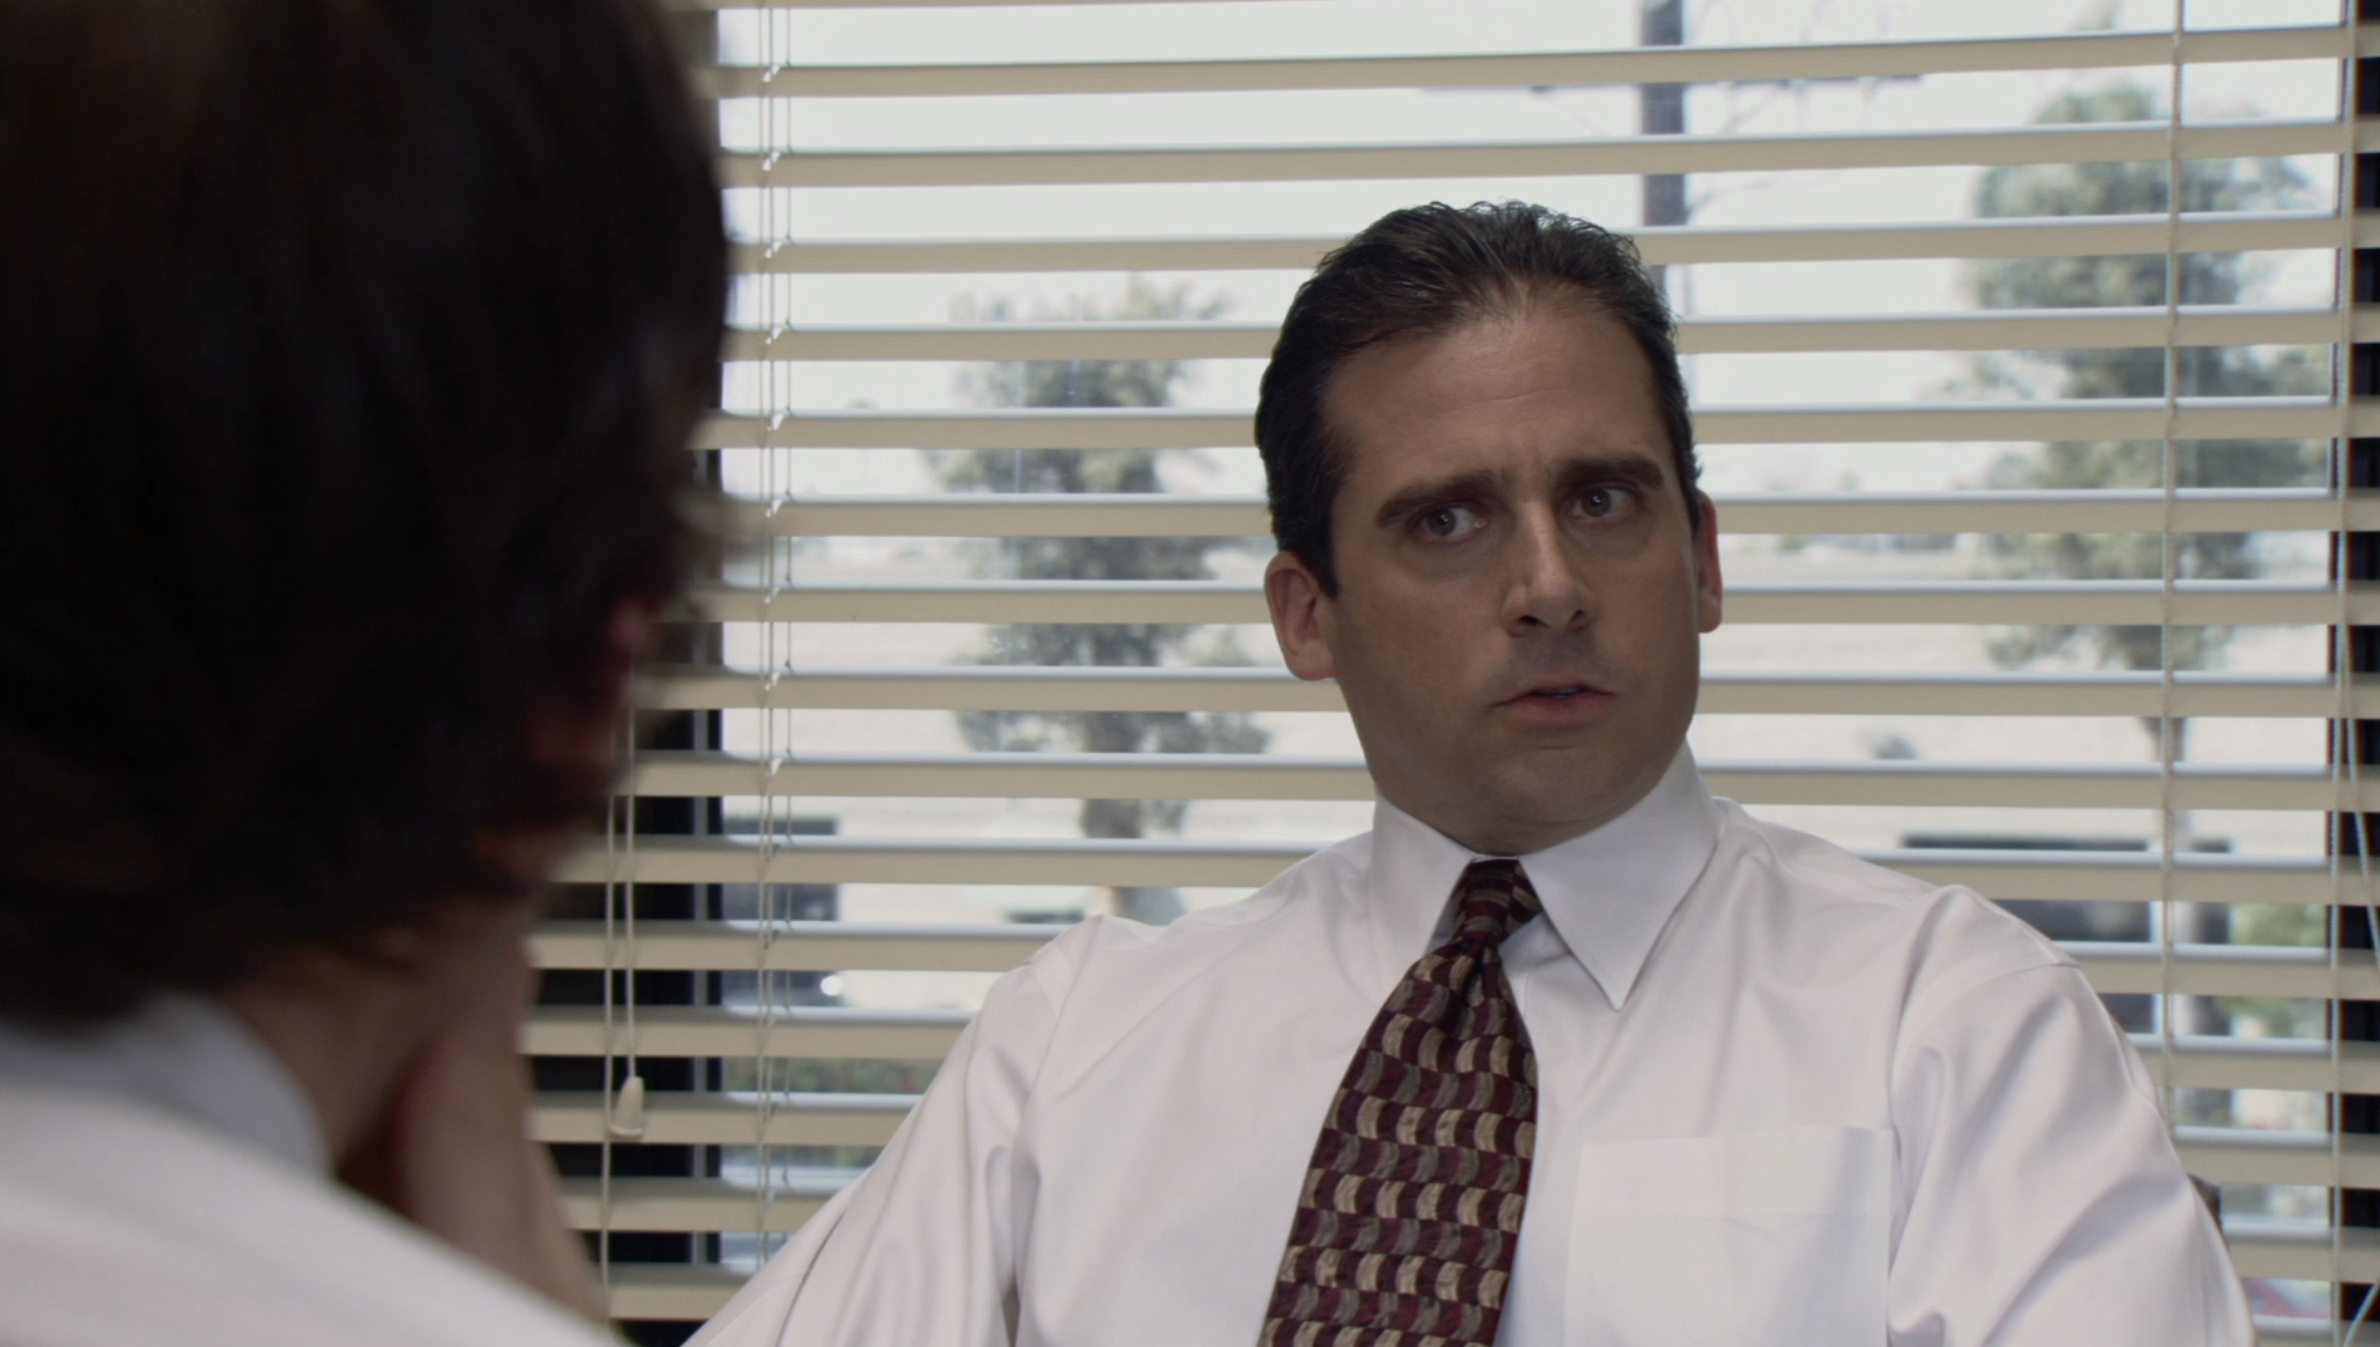 michael with thinning hair on the office